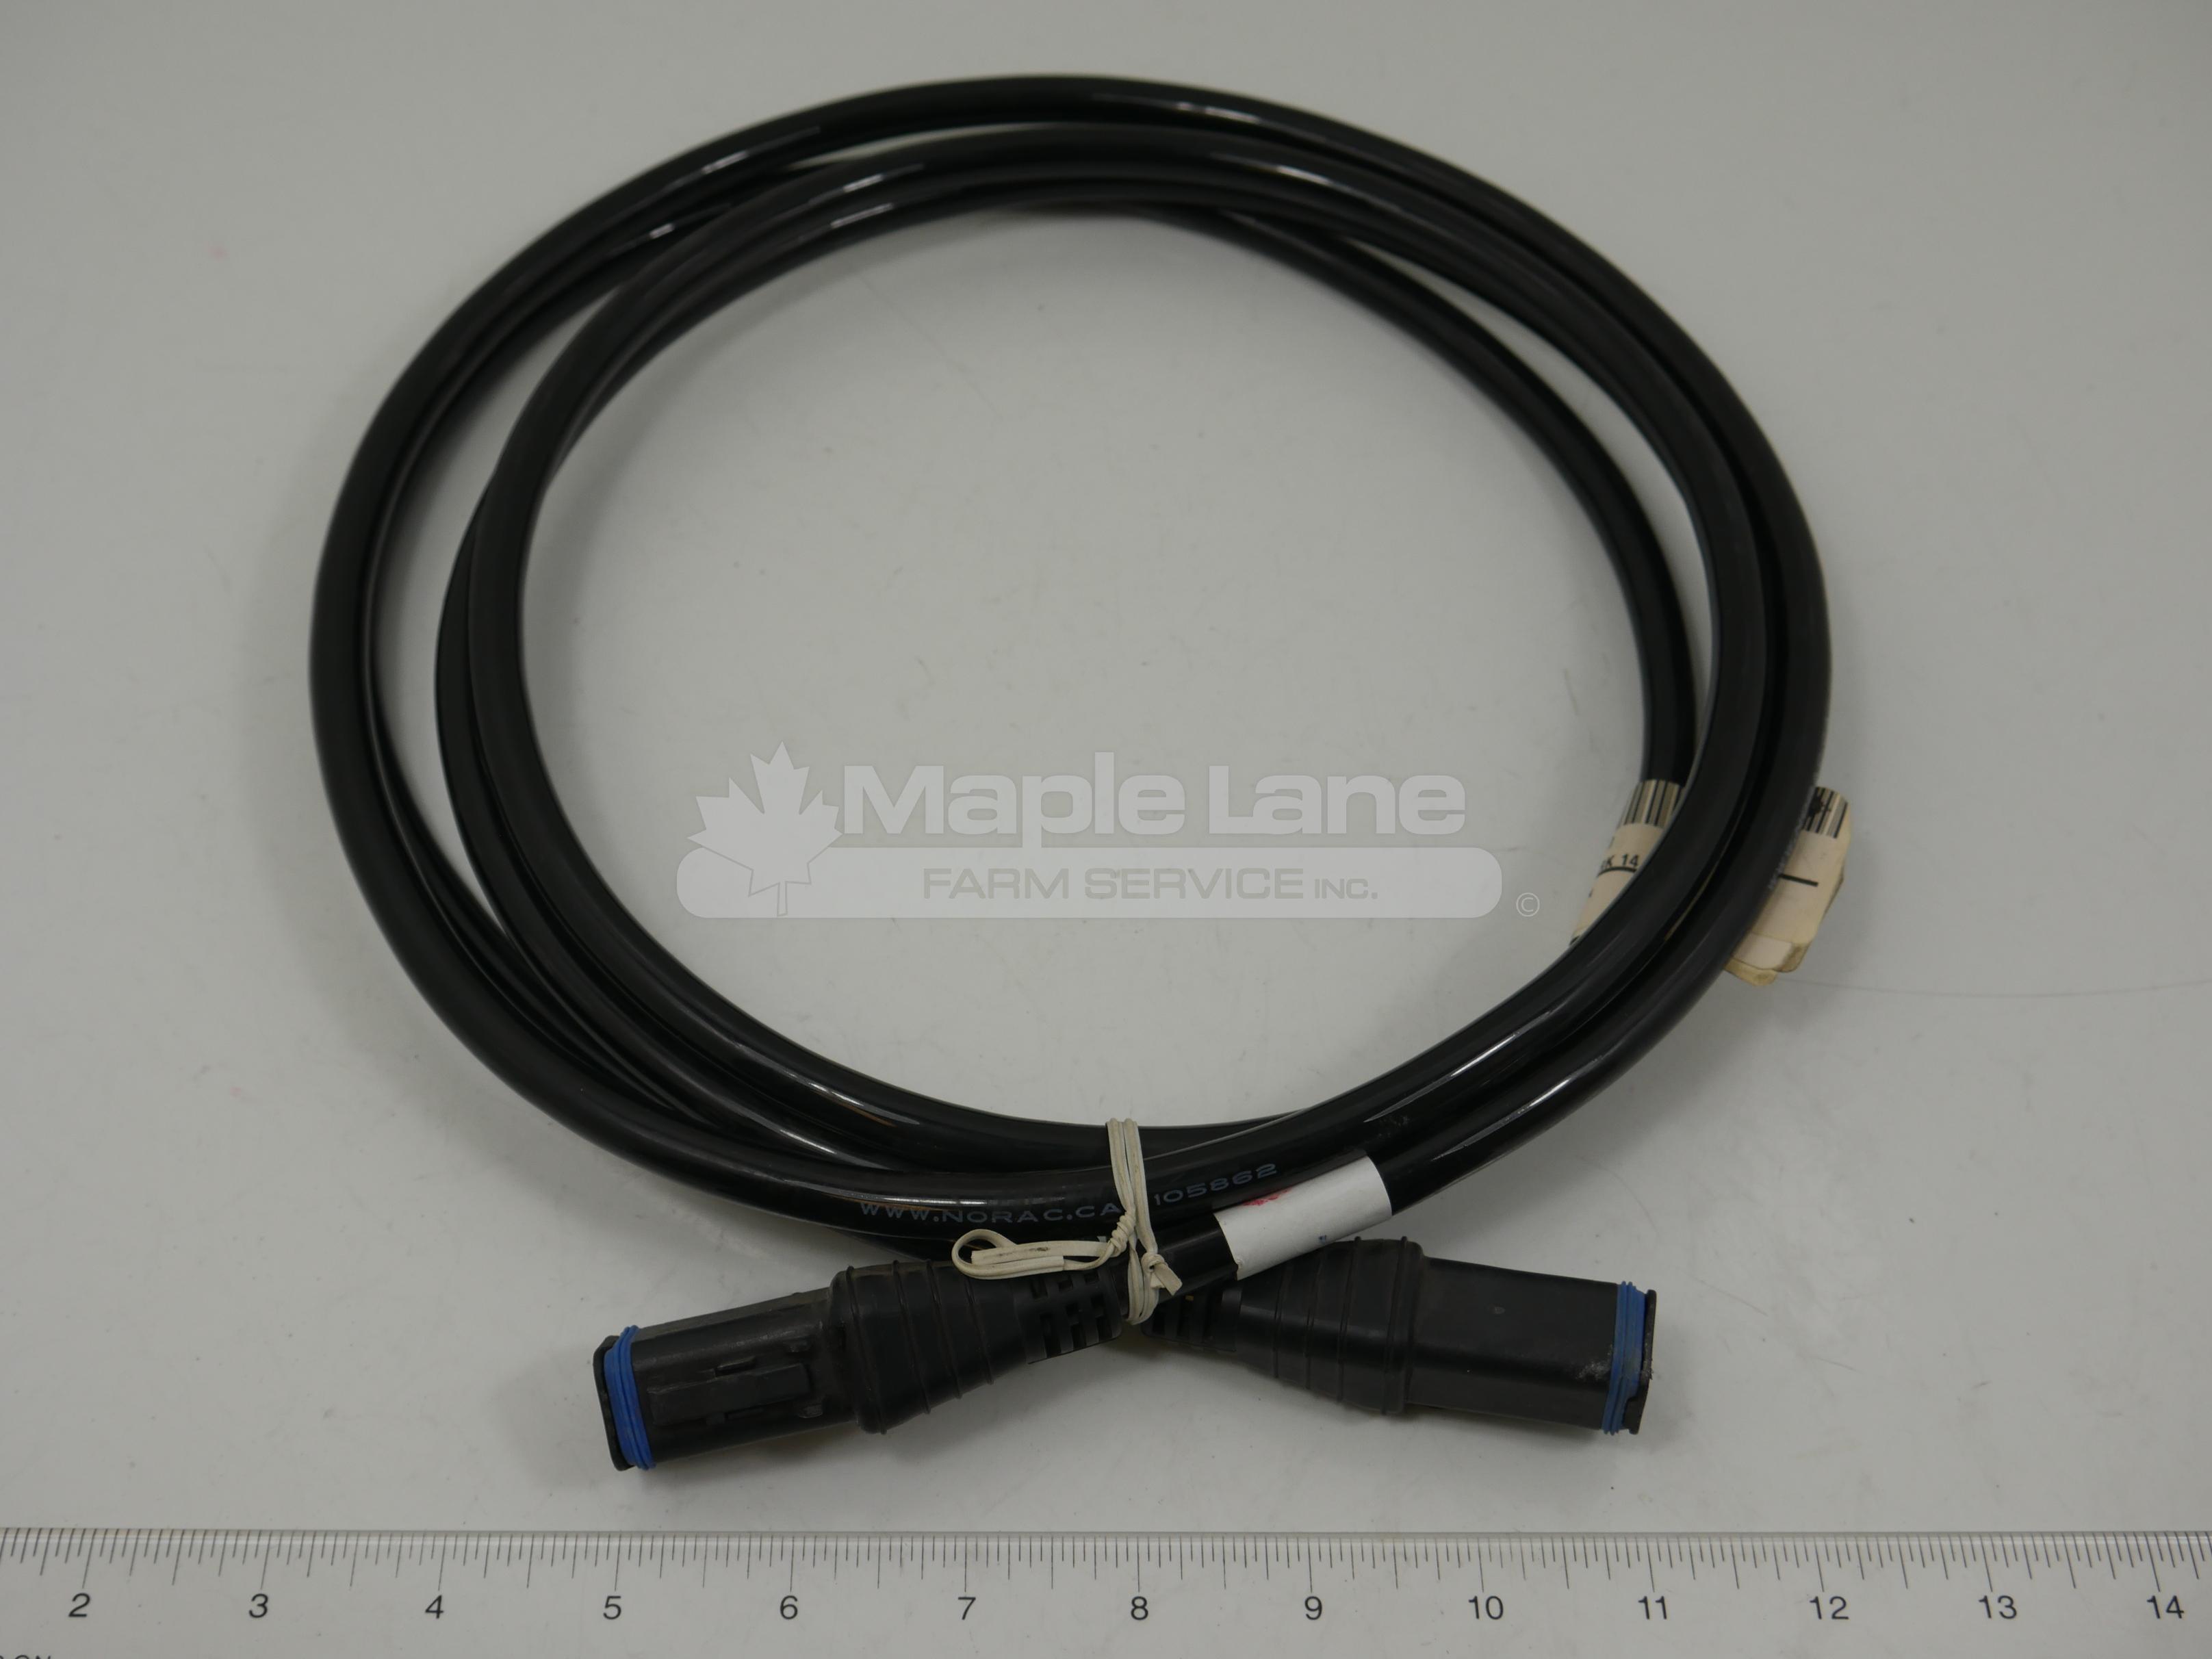 26049900 UC5 Network Cable